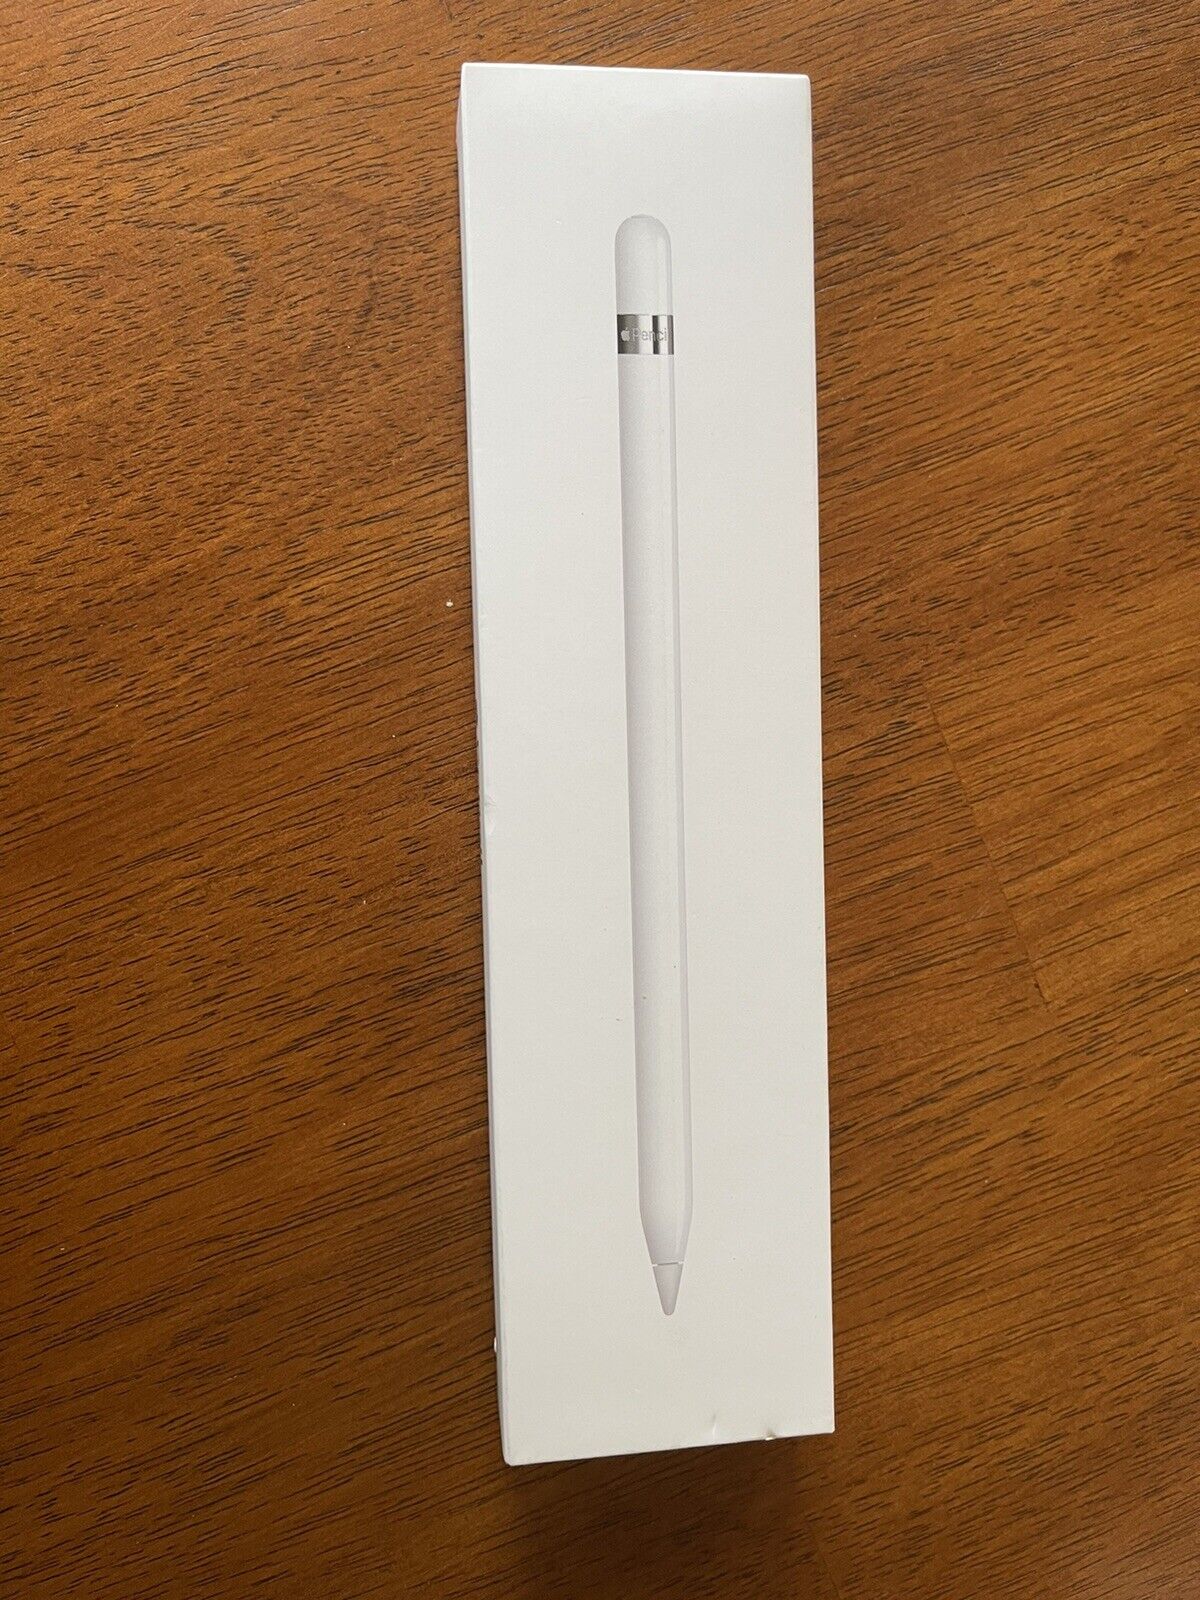 Apple Selling rankings Pencil Super intense SALE for iPad MK0C2AM A Pro A1603